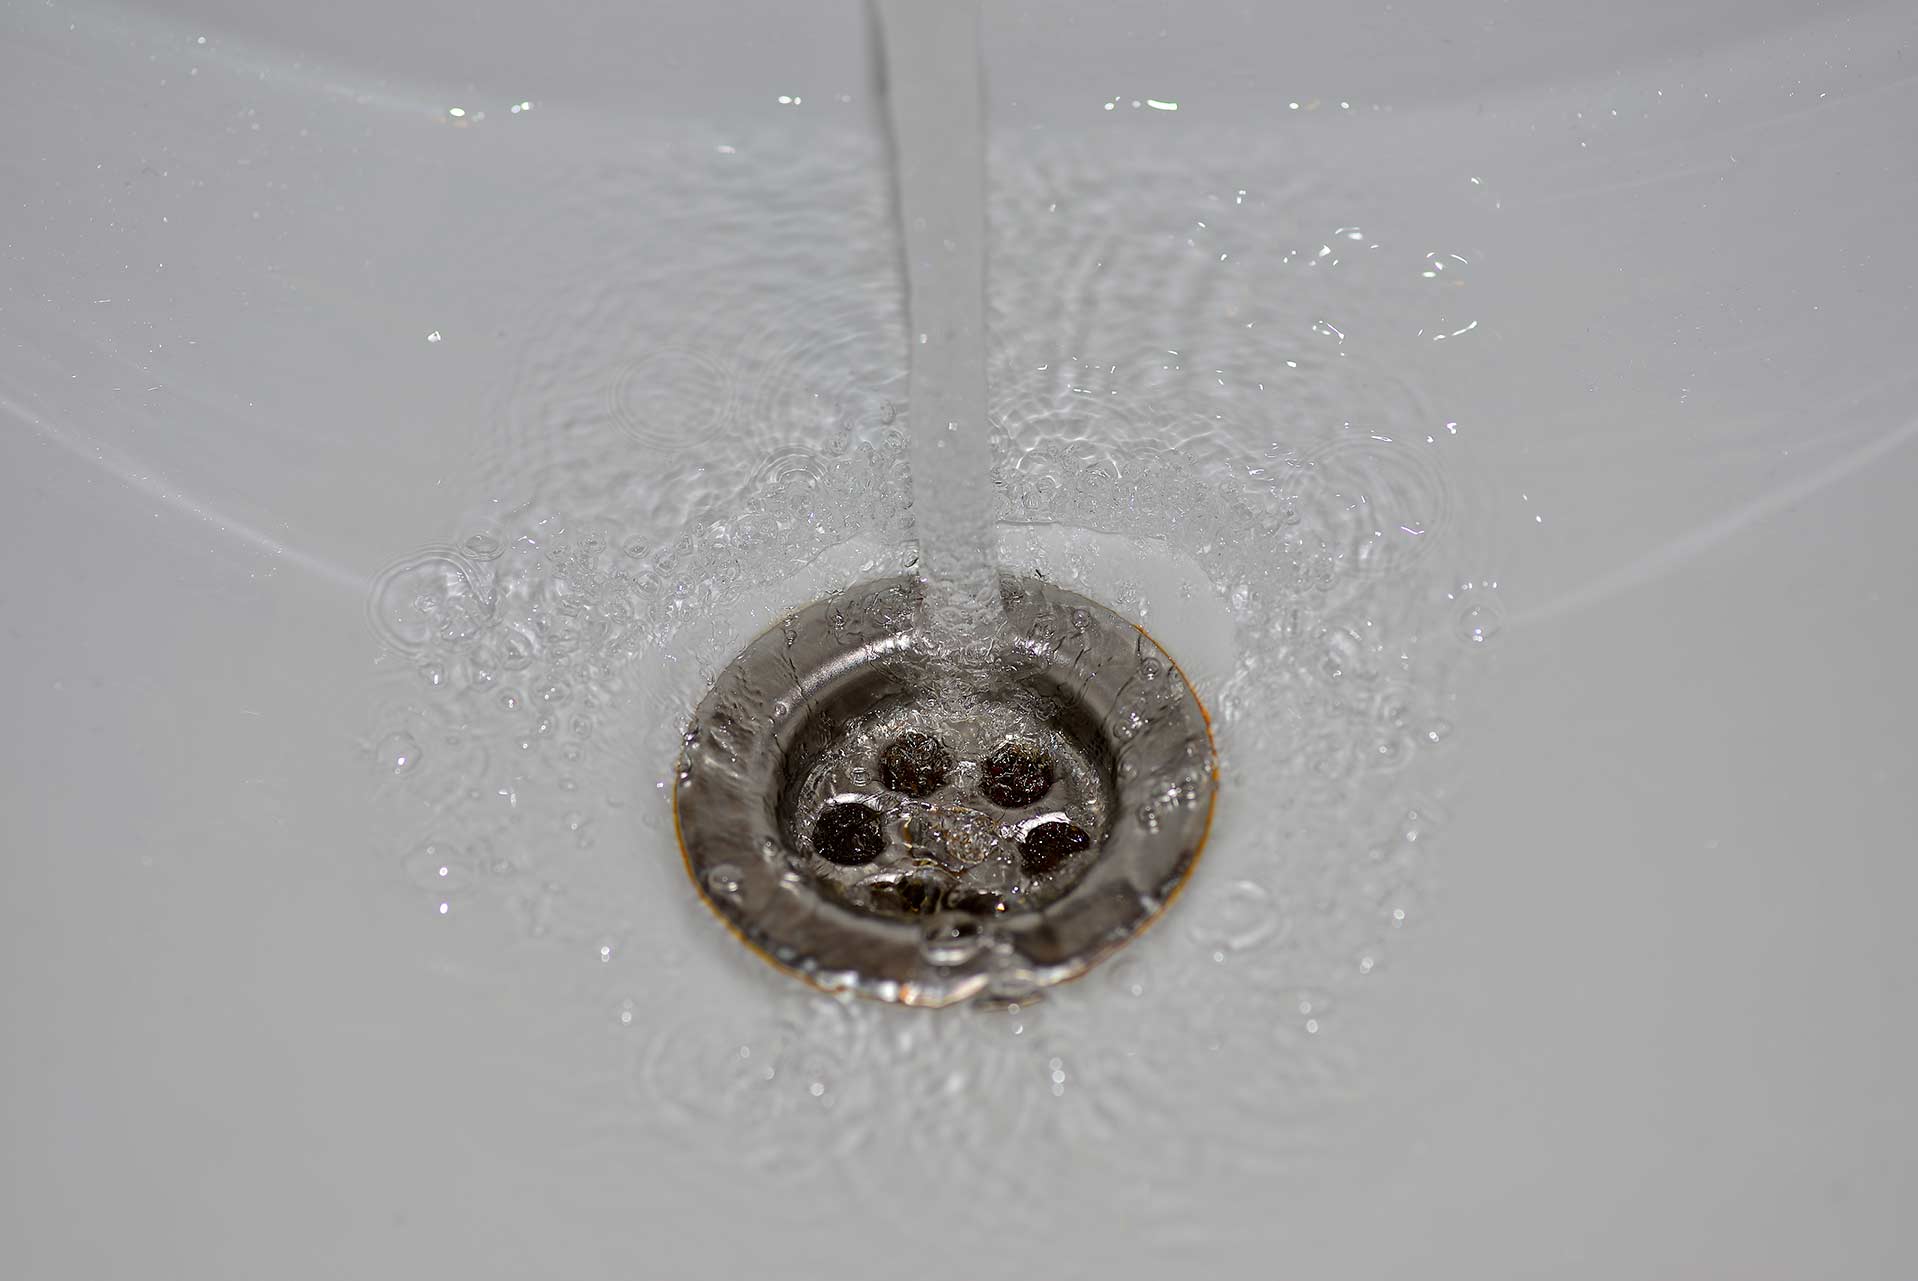 A2B Drains provides services to unblock blocked sinks and drains for properties in Fortis Green.